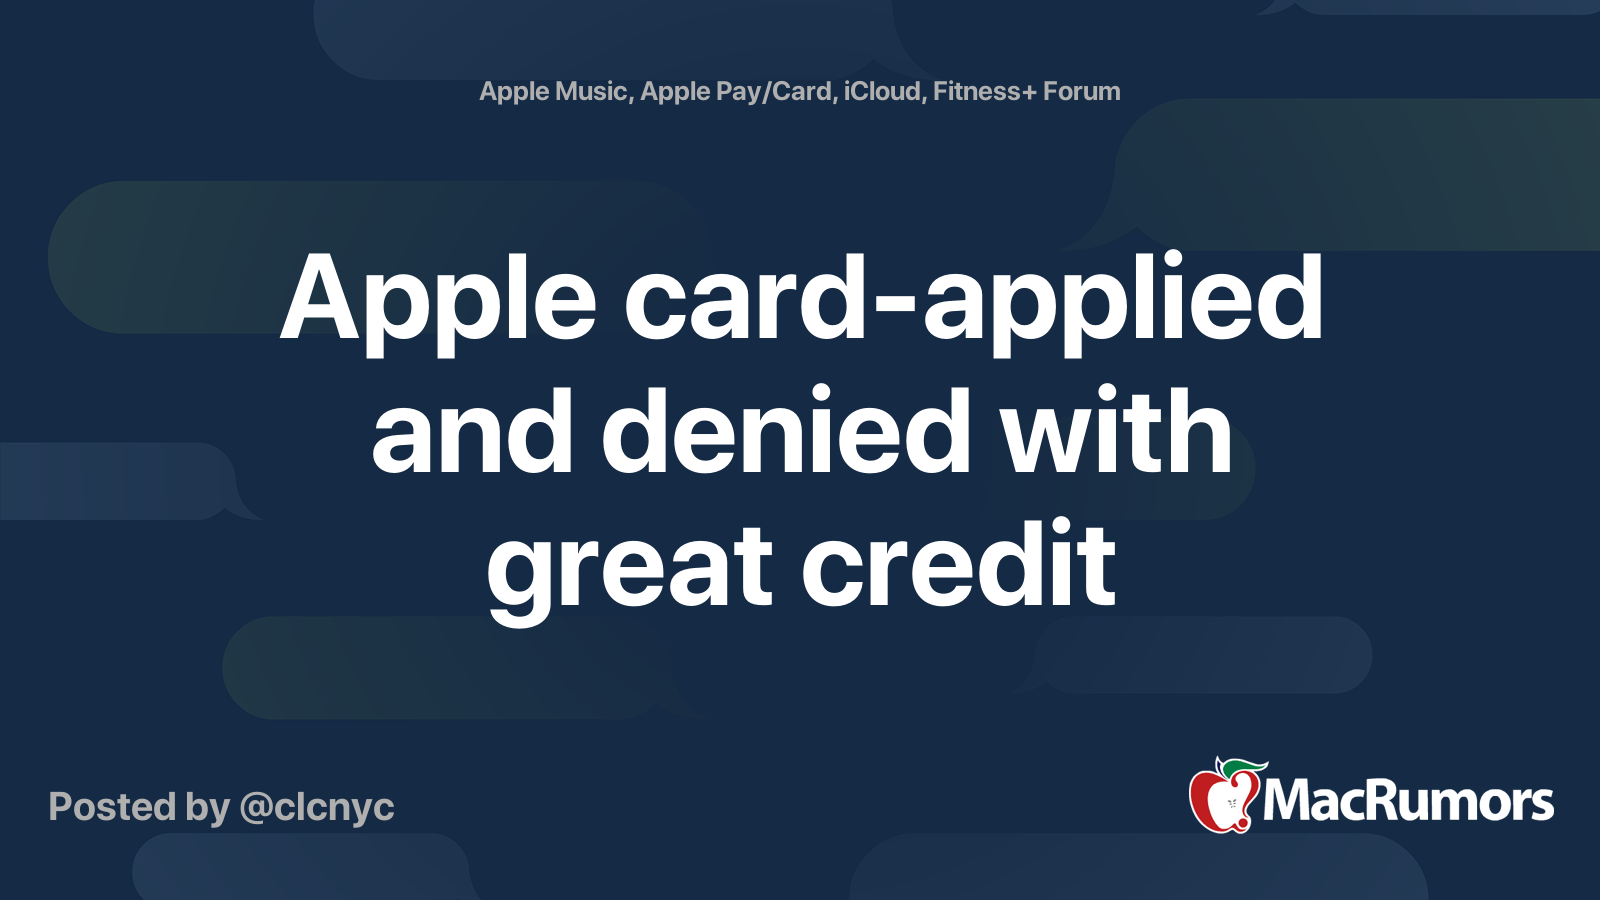 Apple Card Begins Arriving to Customers, Wide Range of Credit Scores  Reportedly Being Approved - MacRumors